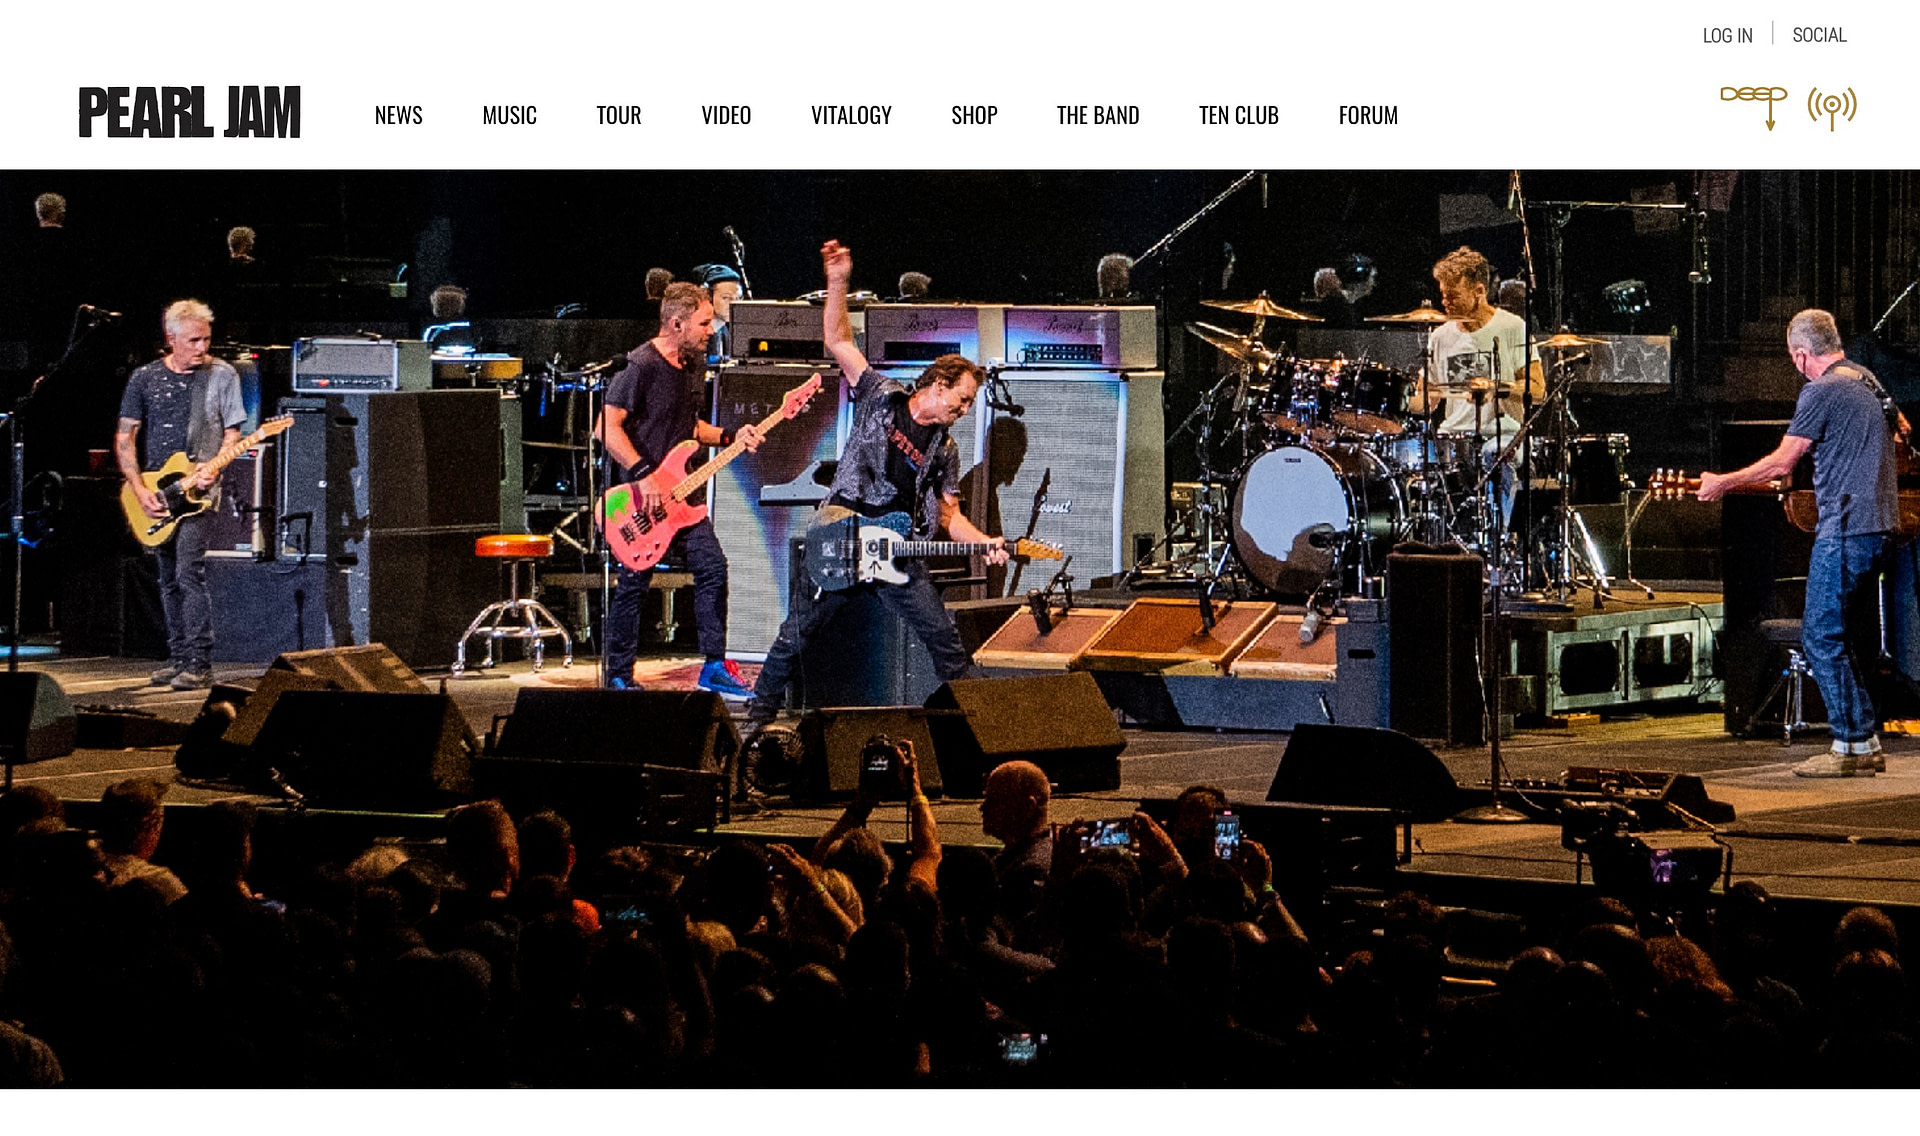 The Pearl Jam website uses open source ecommerce.